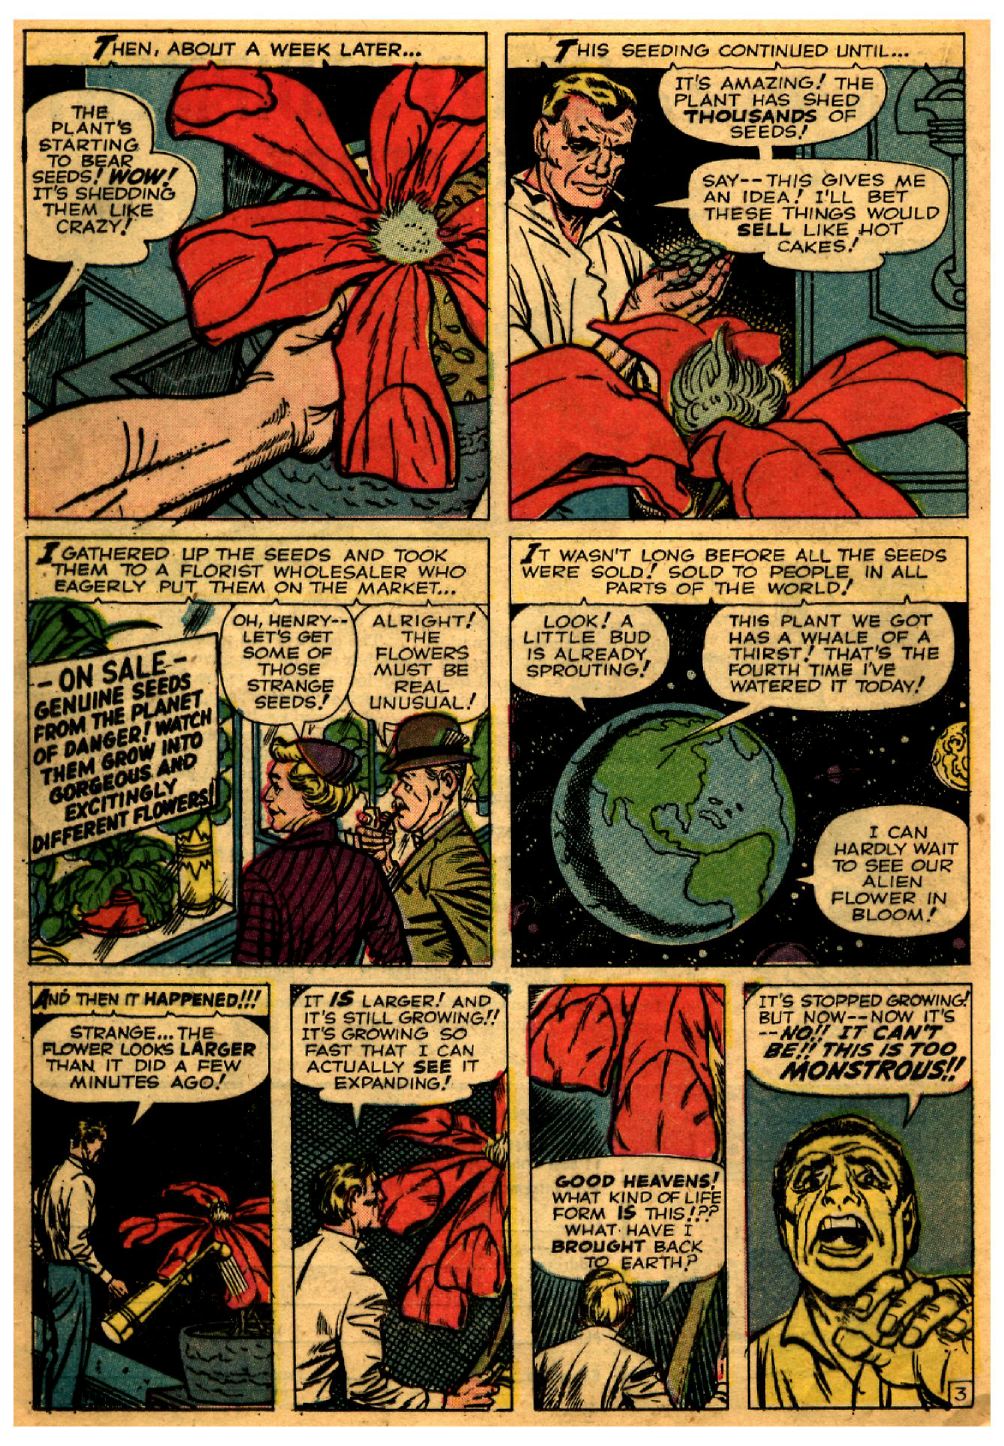 Journey Into Mystery (1952) 56 Page 15